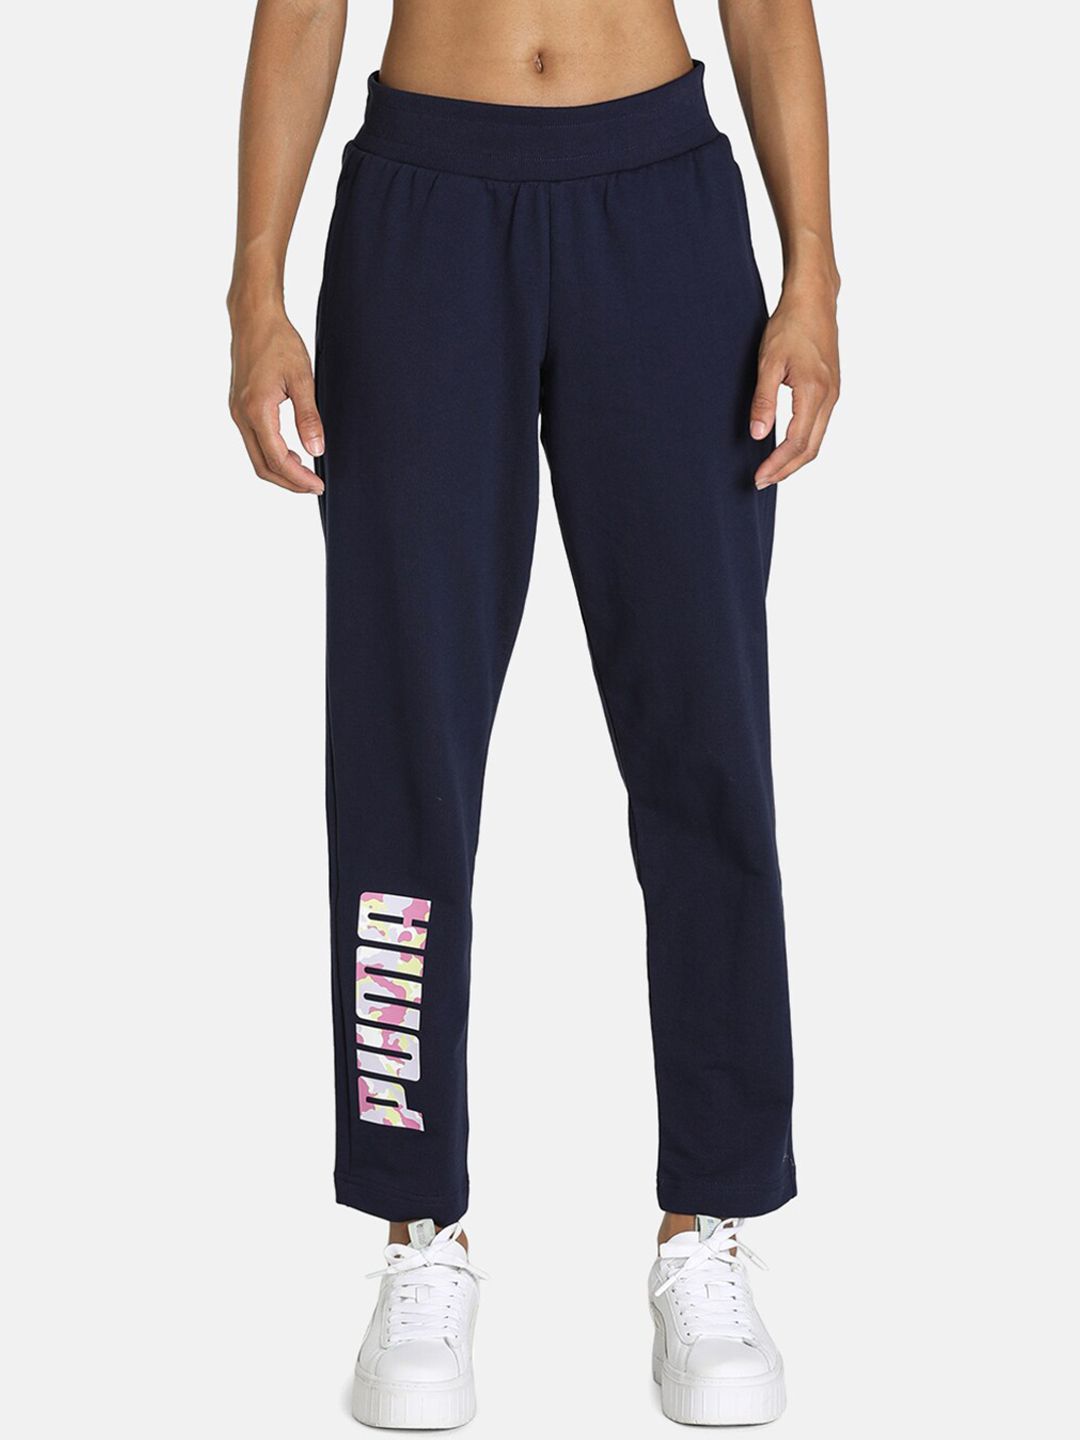 Puma Women Navy Blue Printed Cotton Track Pants Price in India